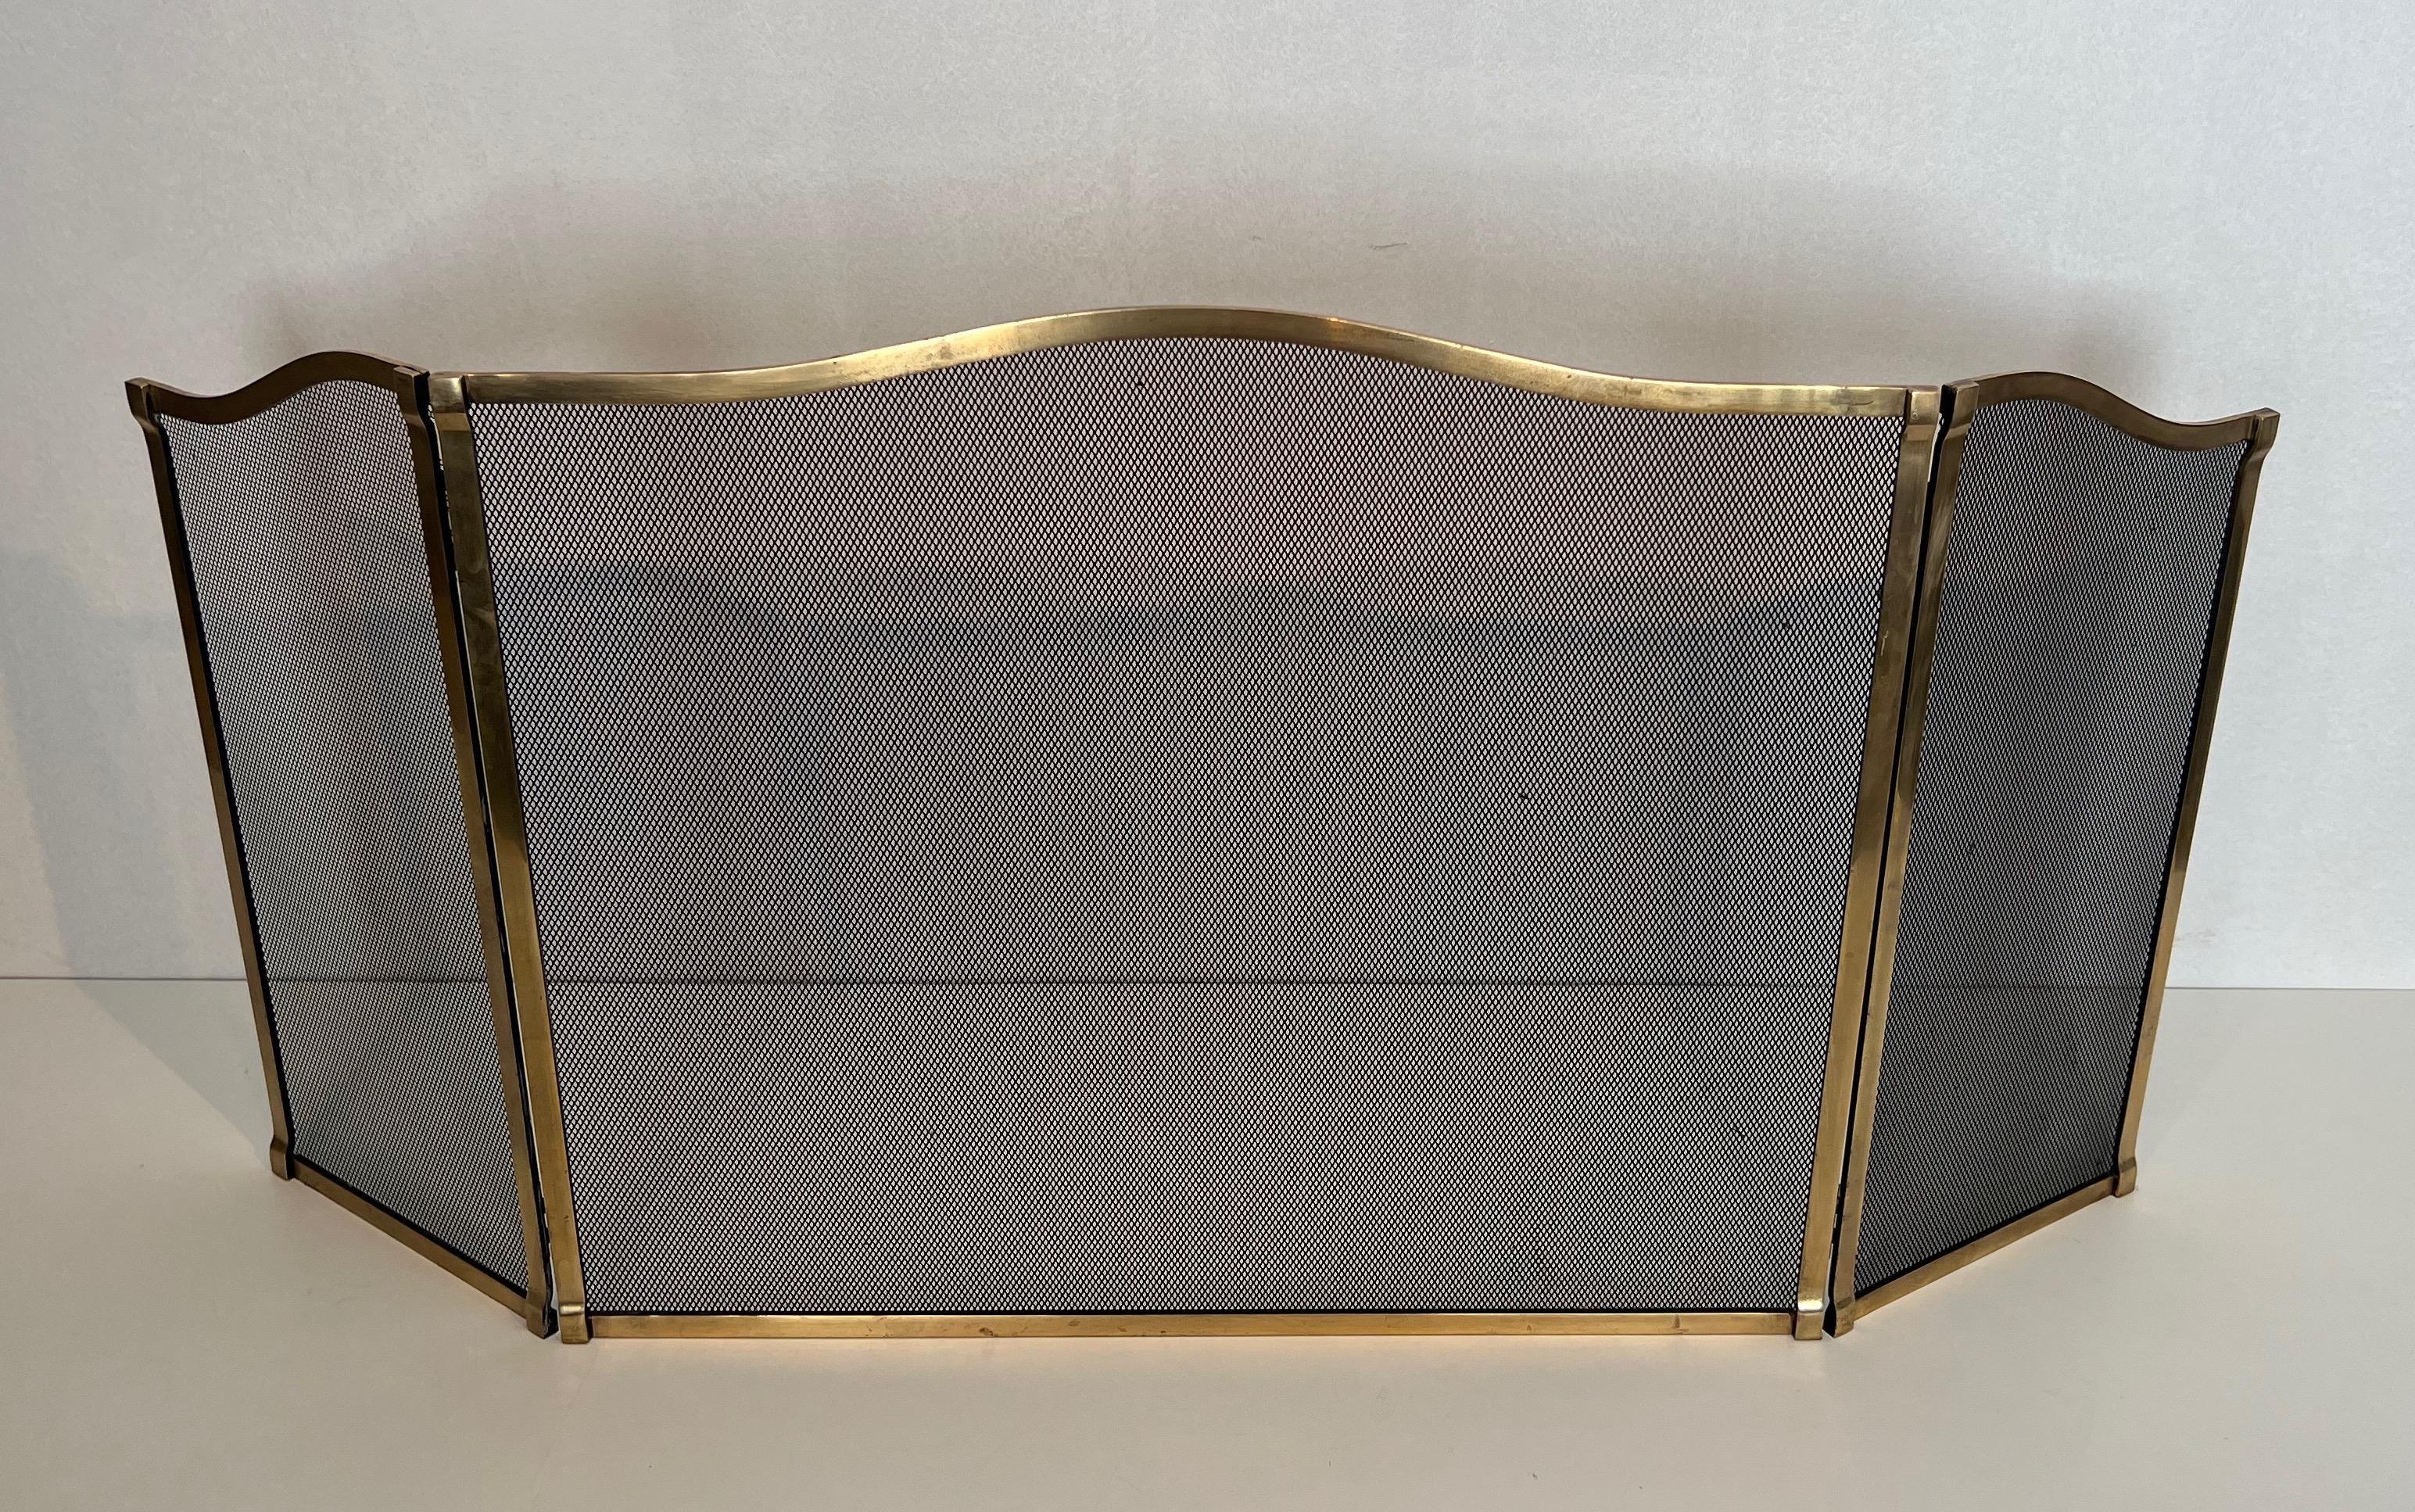 This neoclassical style fireplace screen is made of brass and grilling. The fireguards is made of 3 panels so the wtotal width can be adjusted. This is a French work. Circa 1970